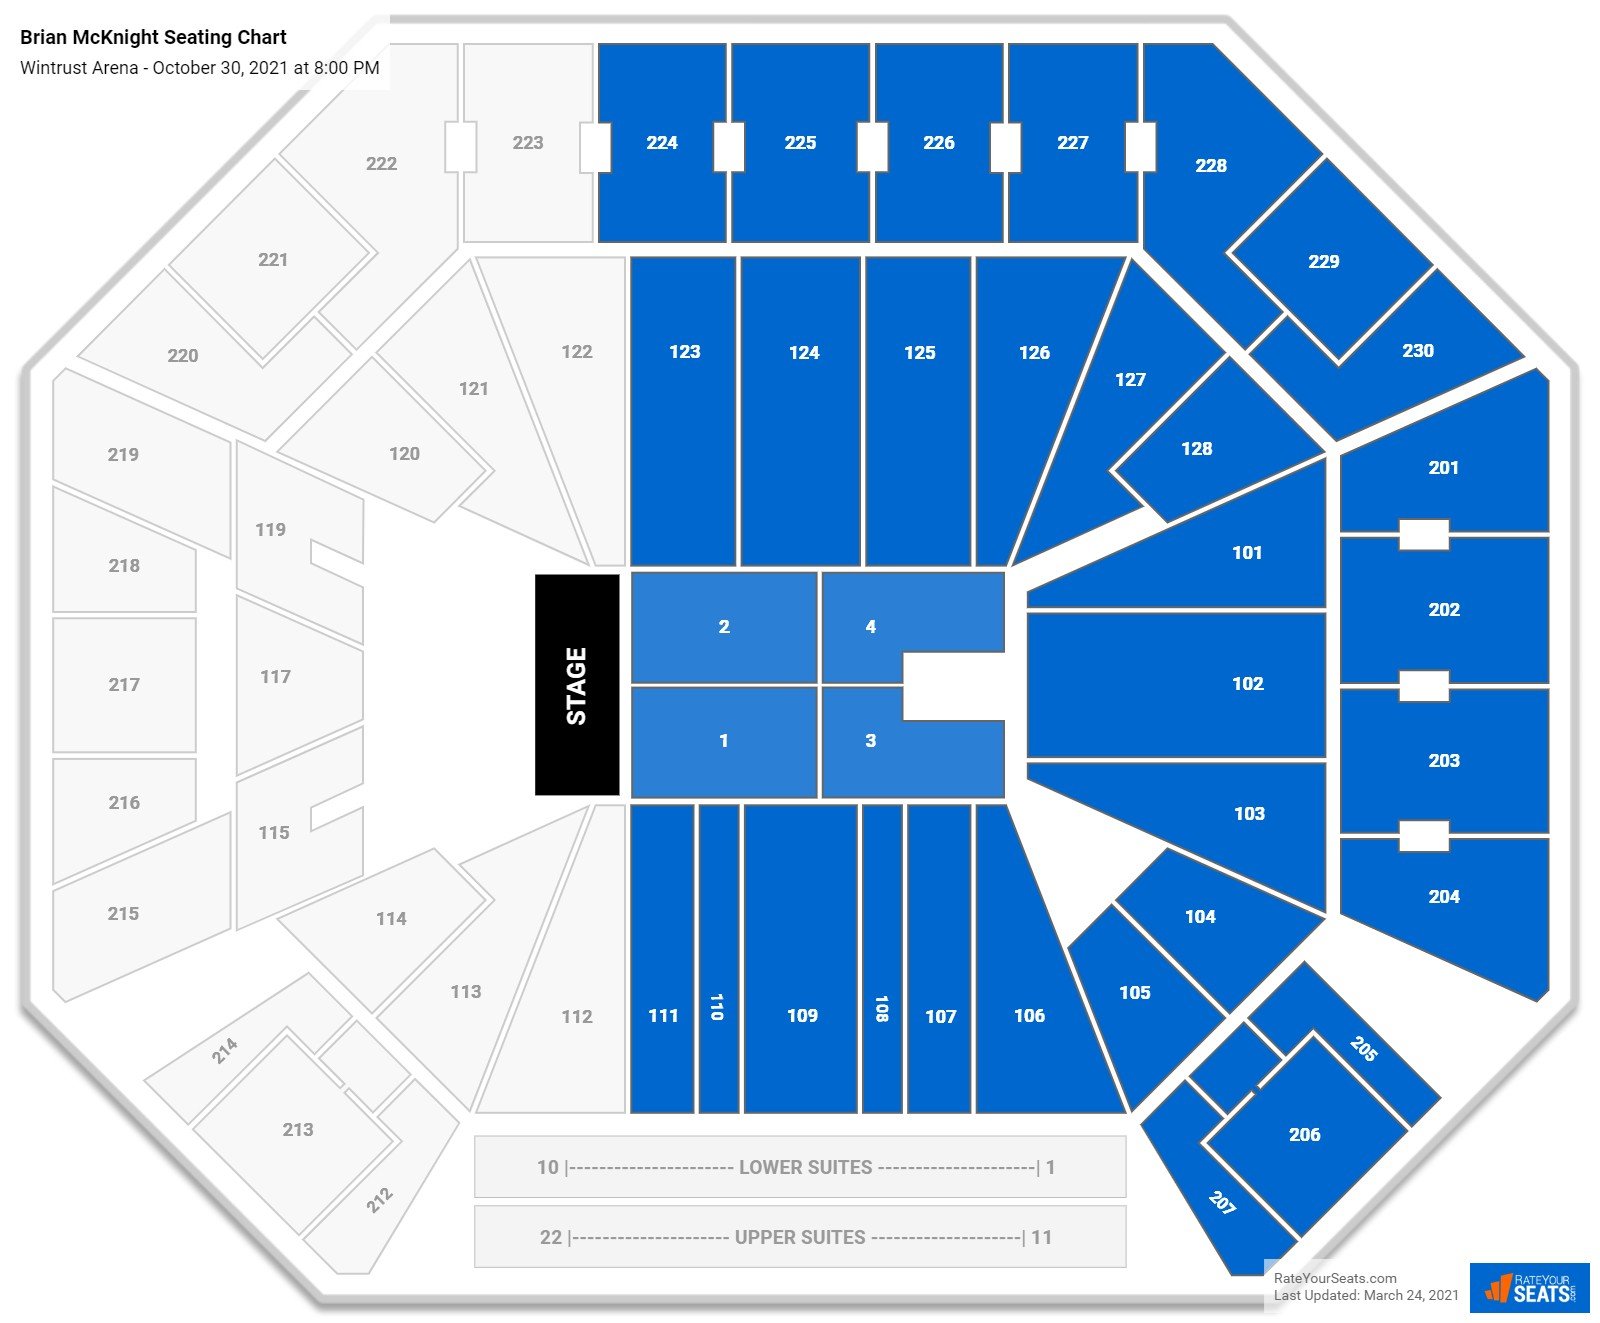 Wintrust Arena Seating Charts for Concerts